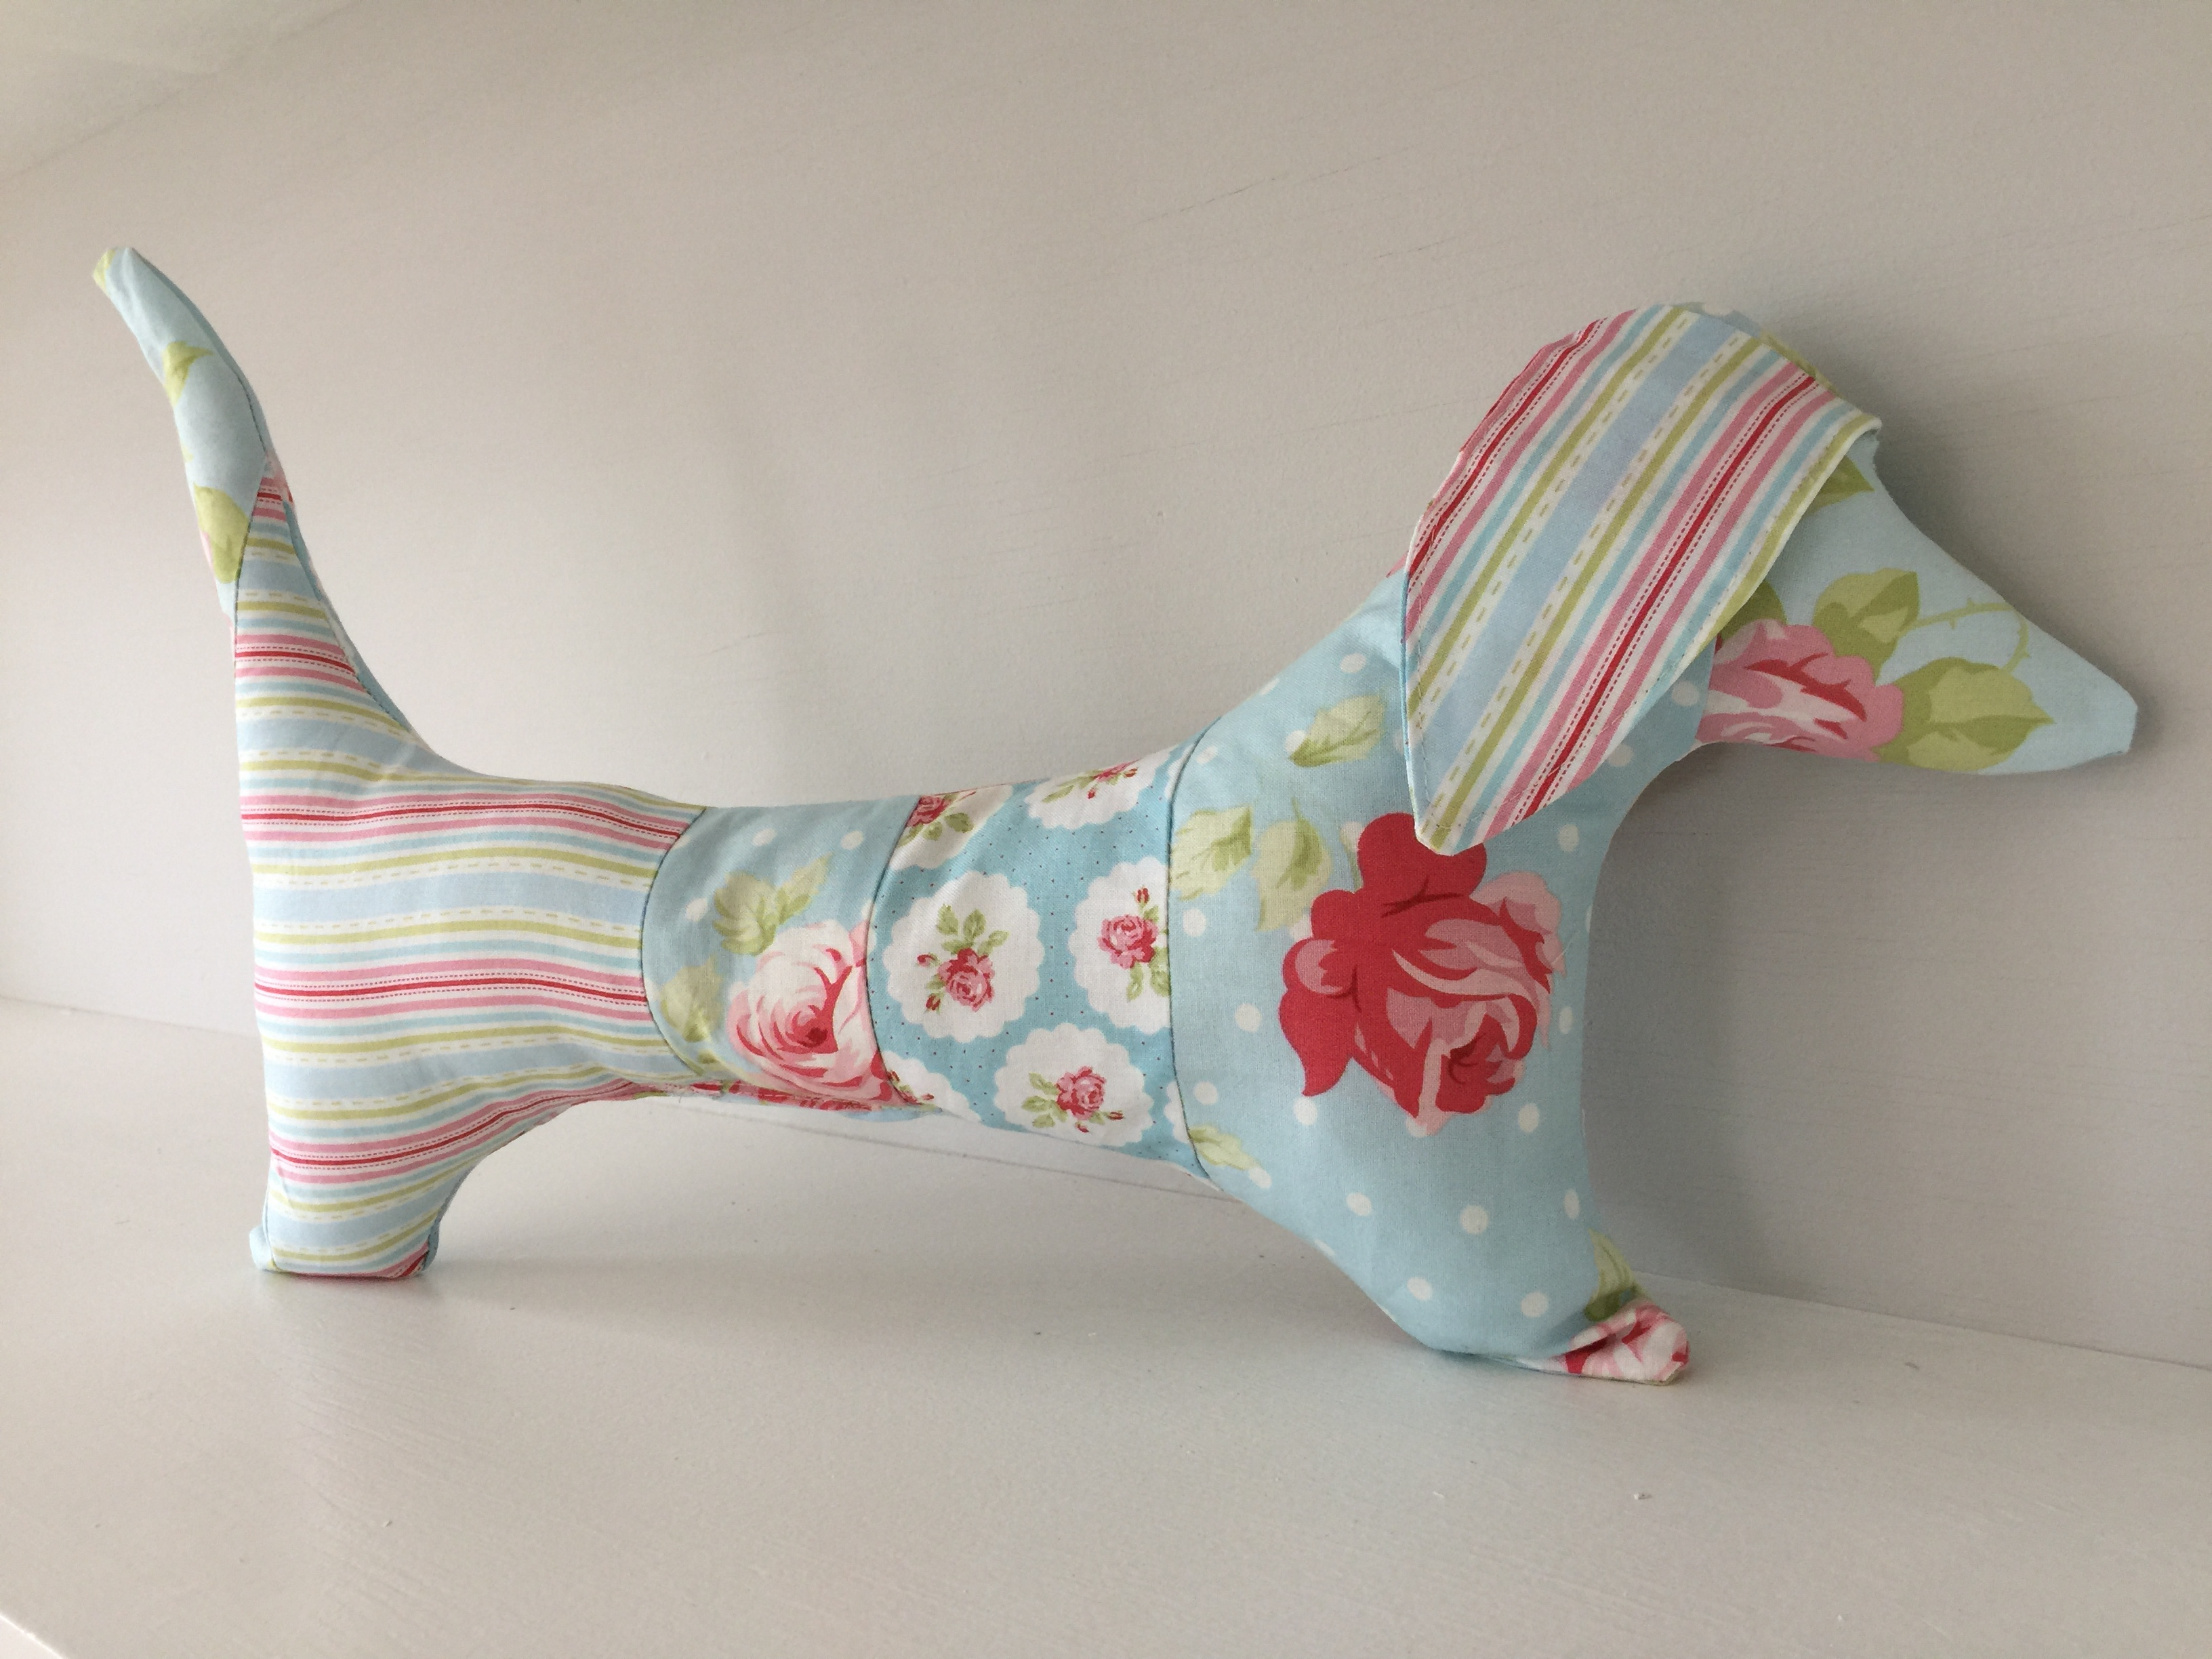 How To Sew A Stuffed Dachshund Dog With Free Pattern – Sewspire - Free Printable Dachshund Sewing Pattern